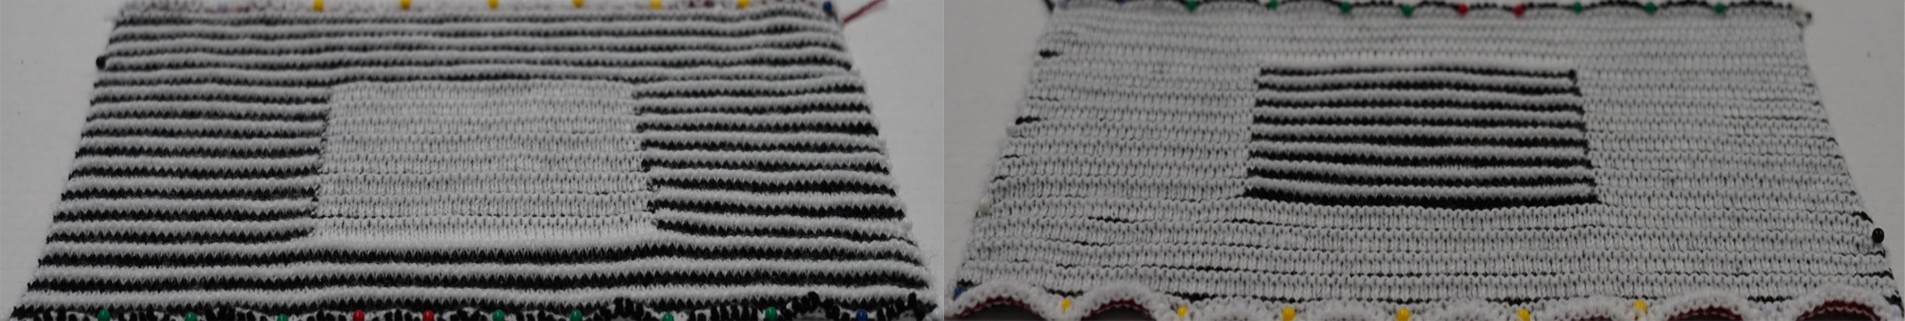 Two images of the same knitted object viewed from opposite sides. In the left image, we see a white square on a black-and-white striped background, giving a gray impression. In the right, the background is fully white, and the inner square is black-and-white striped.